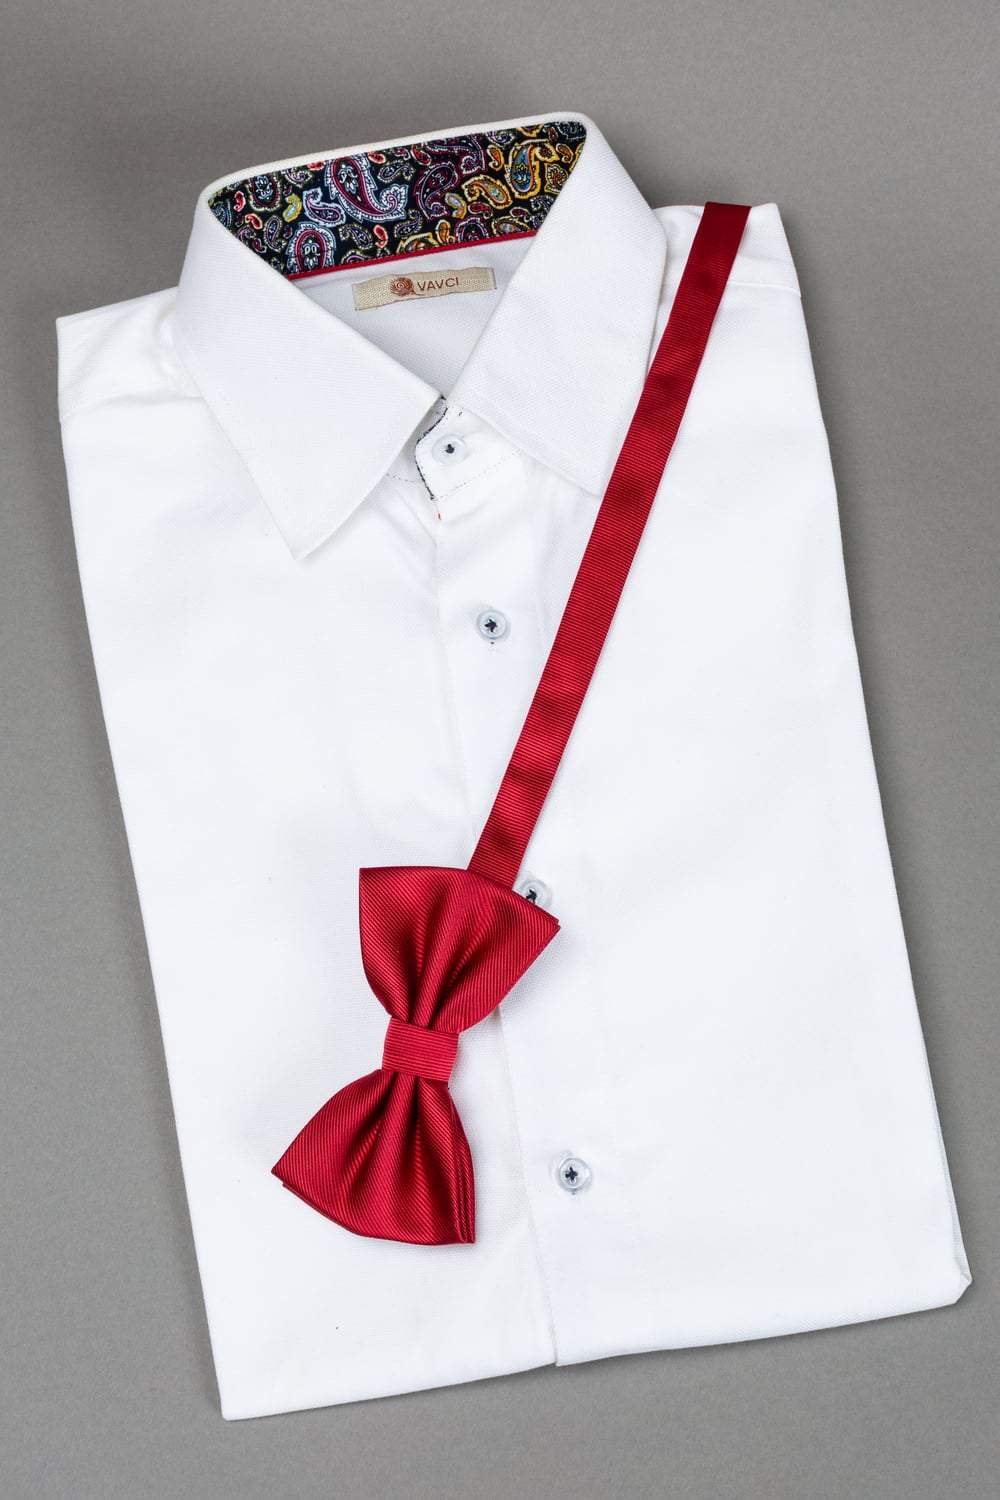 Red Satin Pre-Tied Bow Tie